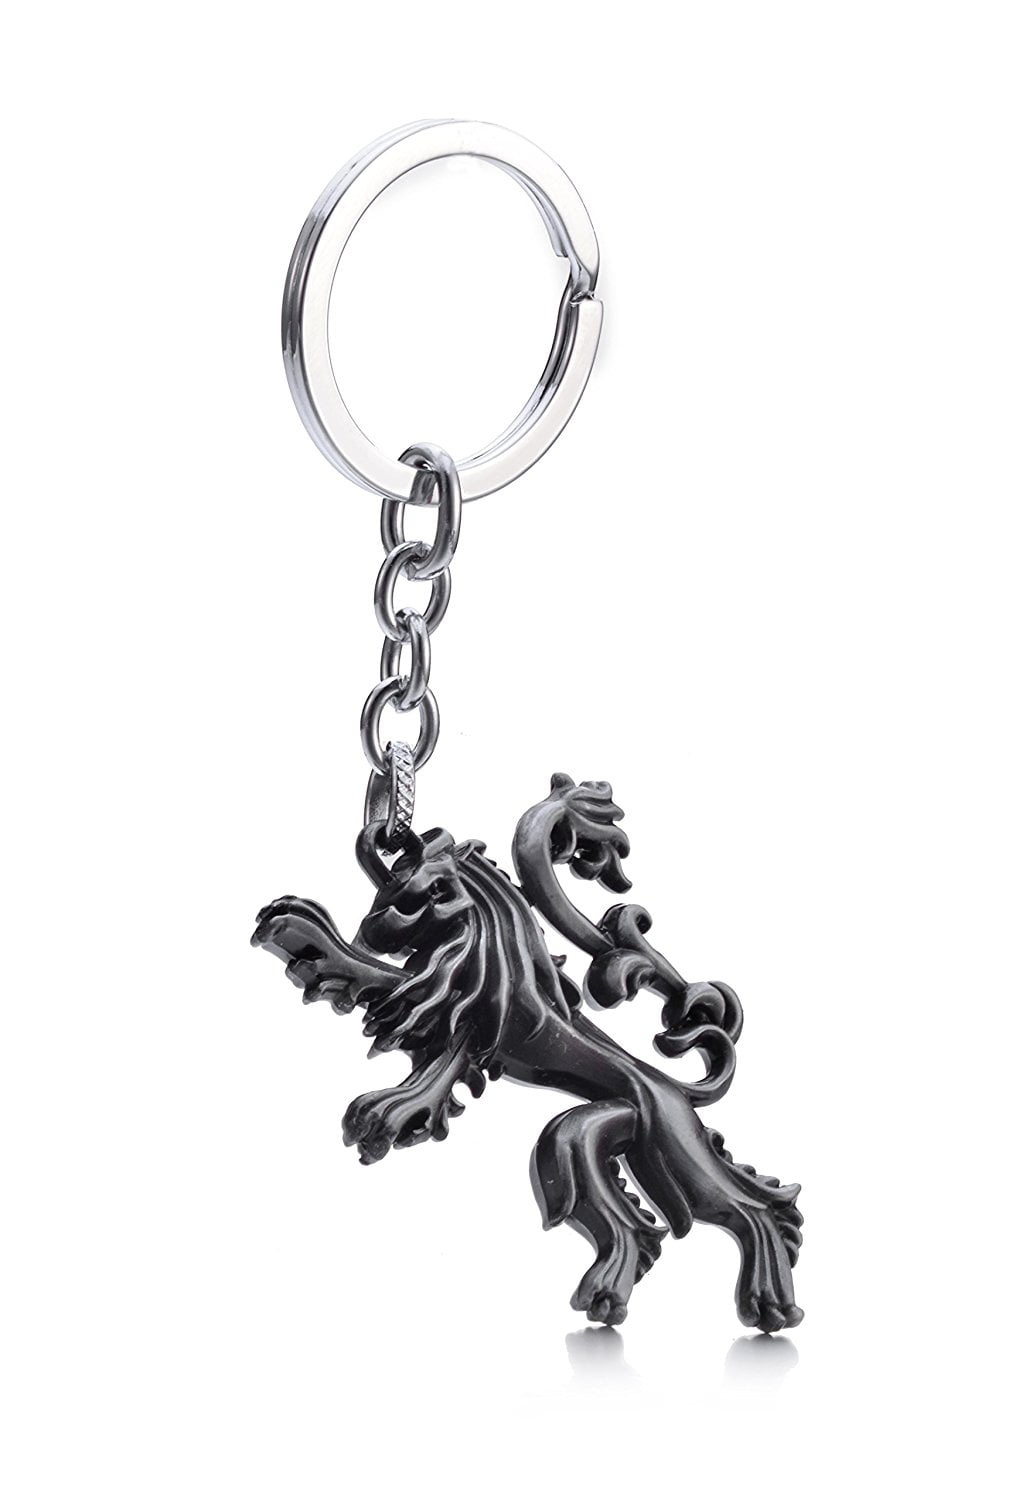 HBO Game of Thrones House Stark Head 3D Metal Keyring Keychain Silver Color NEW 